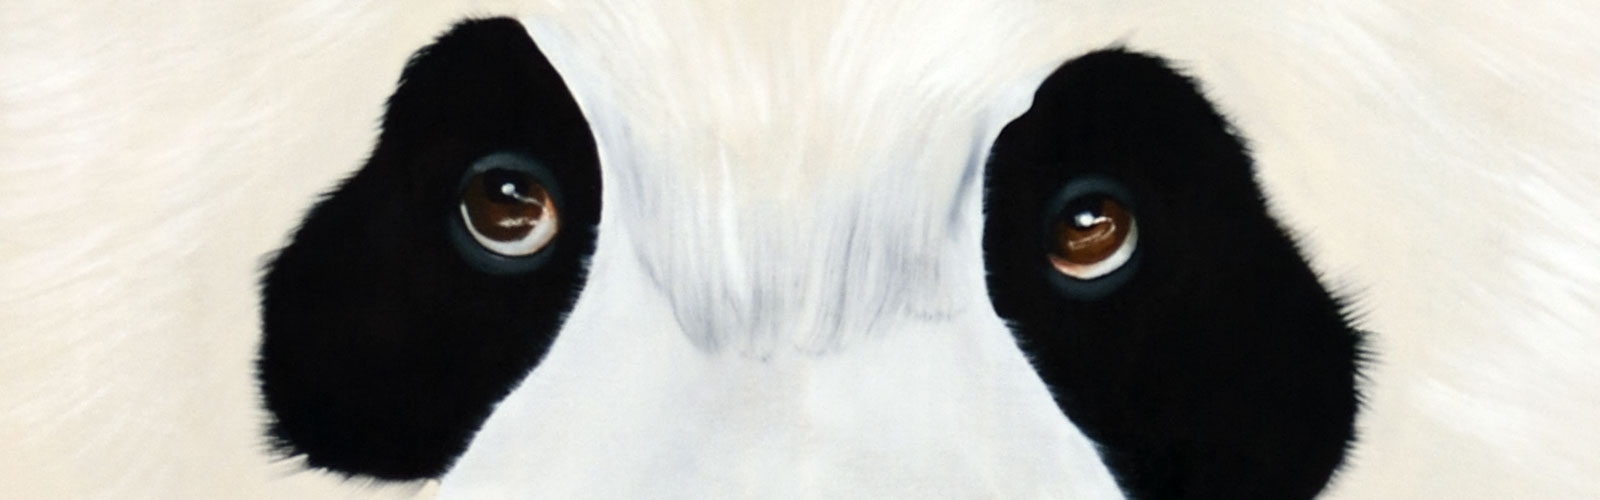 Closeup-Panda animal-painting 動物画 Thierry Bisch Contemporary painter animals painting art  nature biodiversity conservation